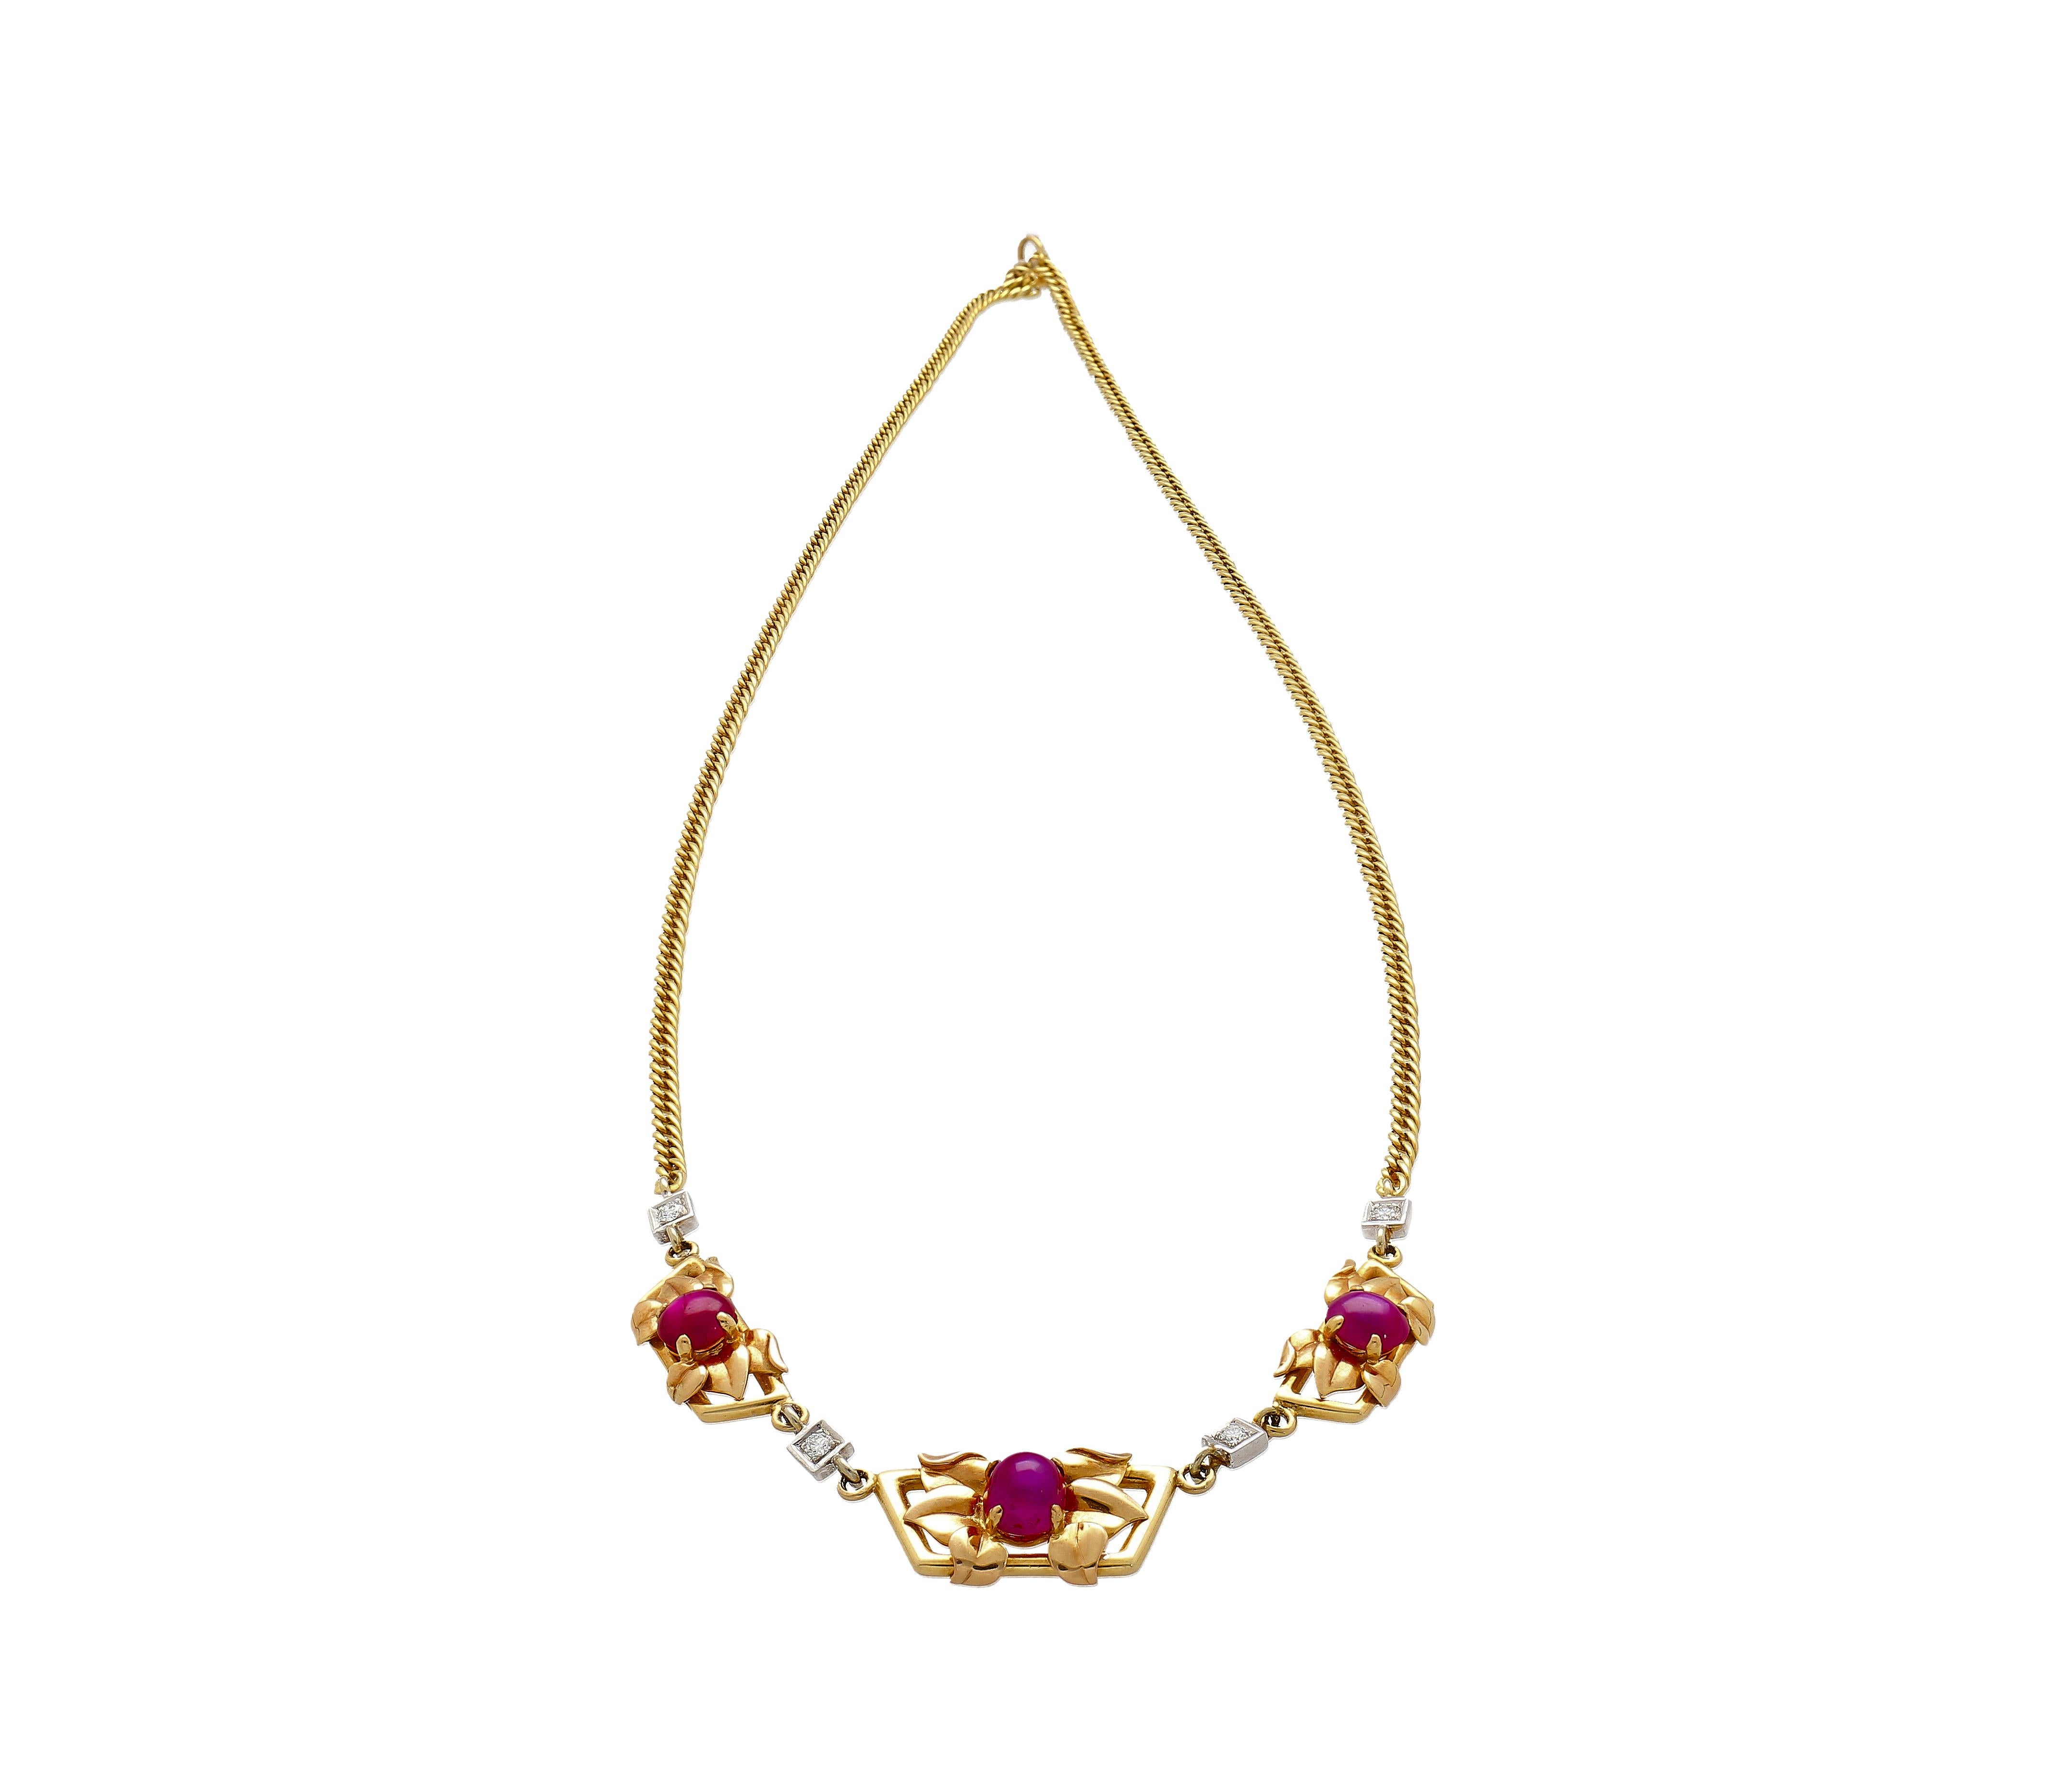 Cabochon 6.22 Carat Star-Ruby with Gold Detailing & Diamonds in 14K Gold Charm Necklace For Sale